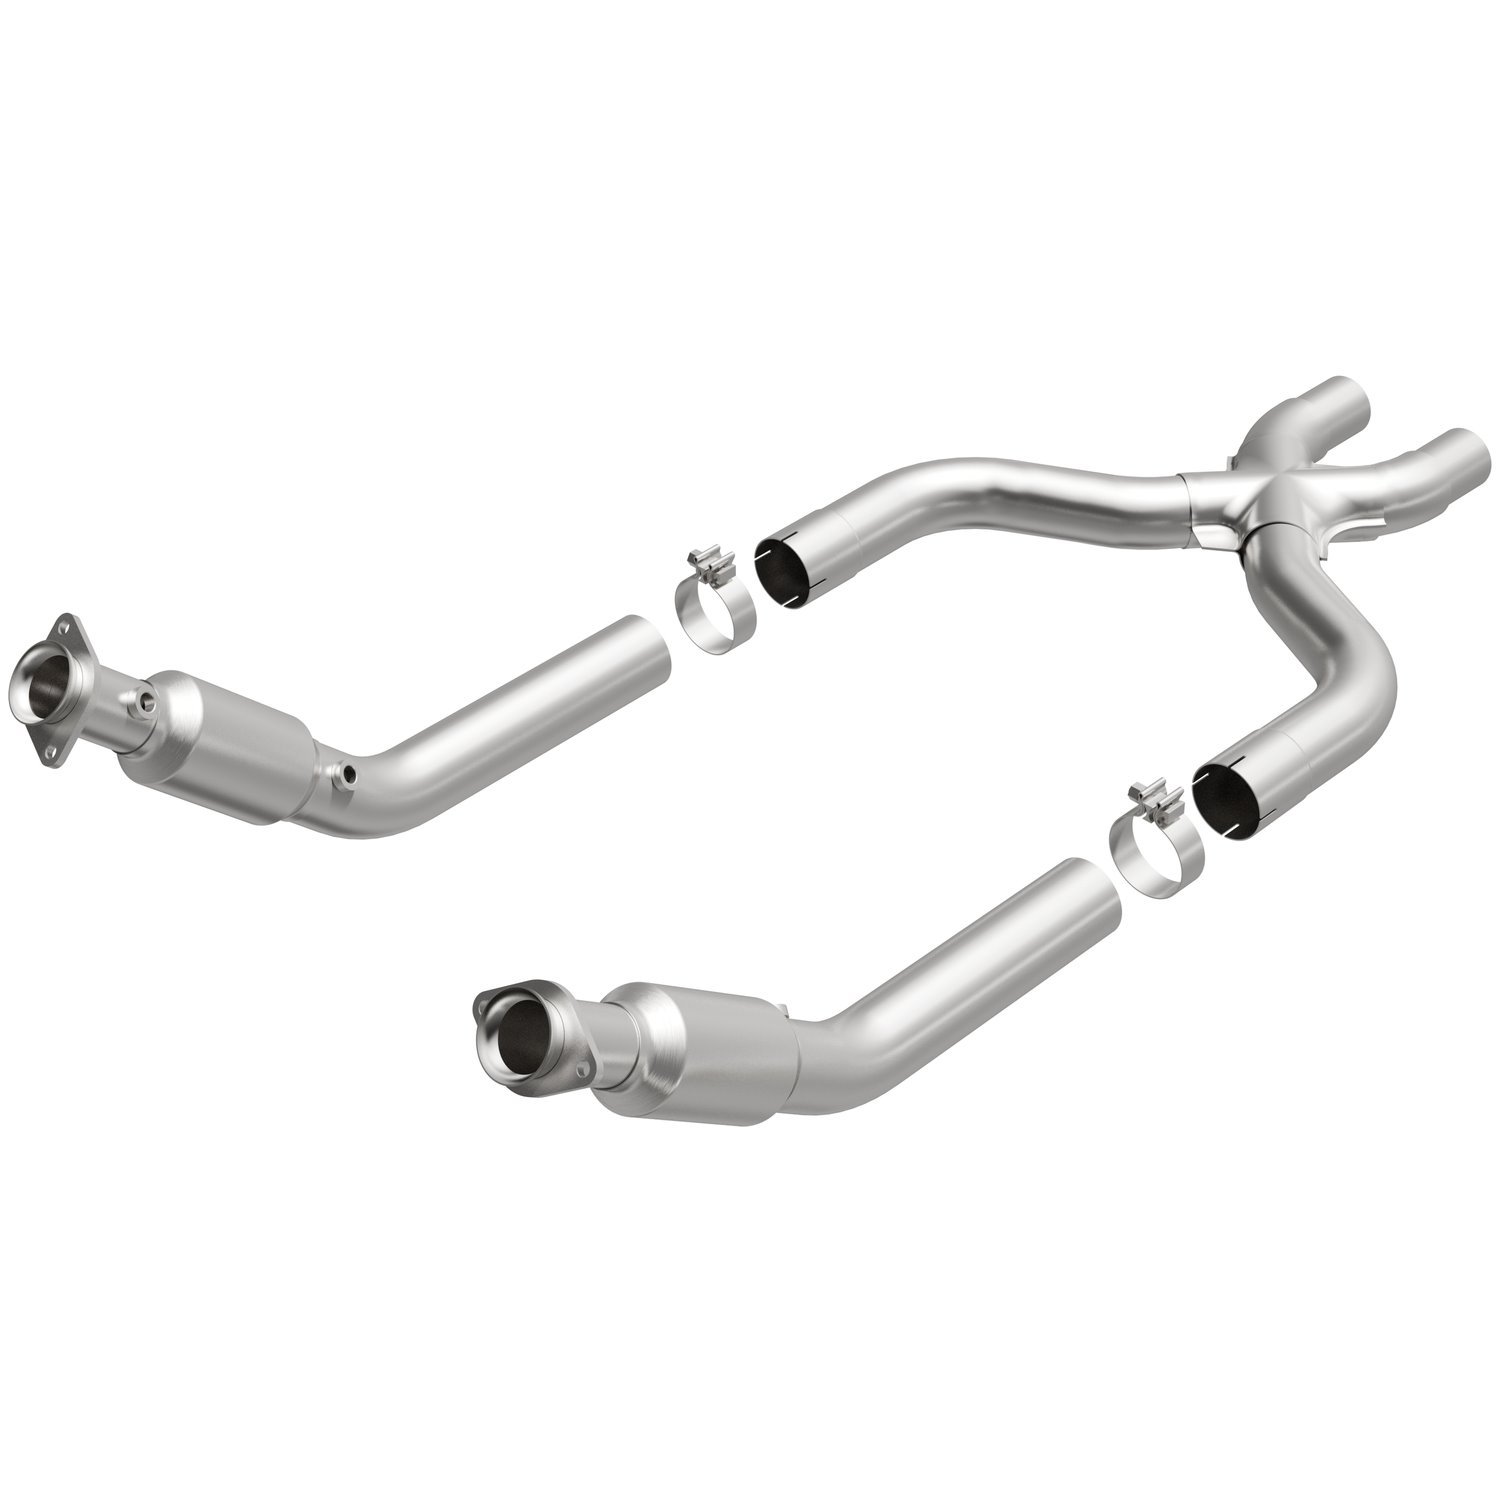 2013-2014 Ford Mustang OEM Grade Federal / EPA Compliant Direct-Fit Catalytic Converter